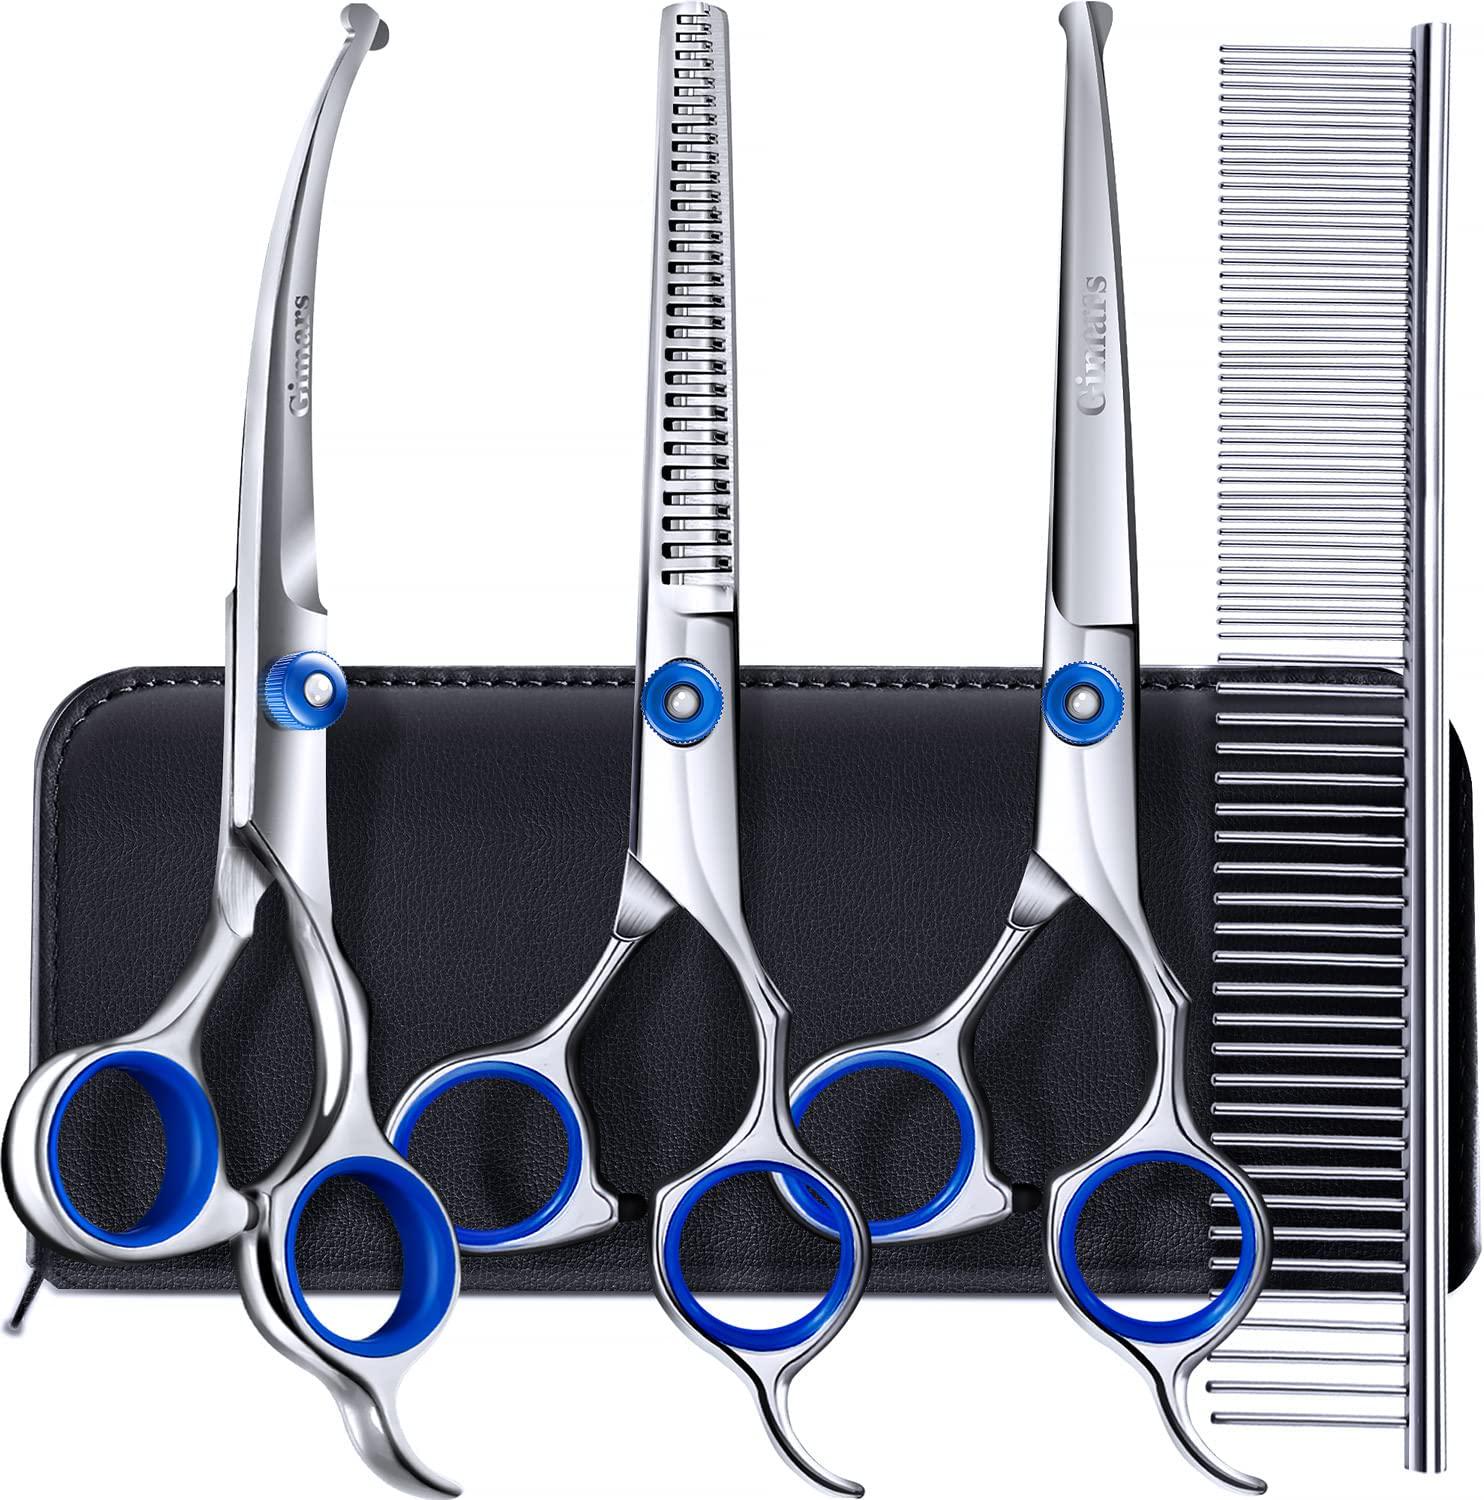 Gimars, Gimars Titanium Coated 3CR Stainless Steel Dog Grooming Scissors Kit, Heavy Duty Pet Grooming Trimmer Kit - Thinning, Straight, Curved Shears with Comb for Long and Short Hair, Fur for Cat and More Pets